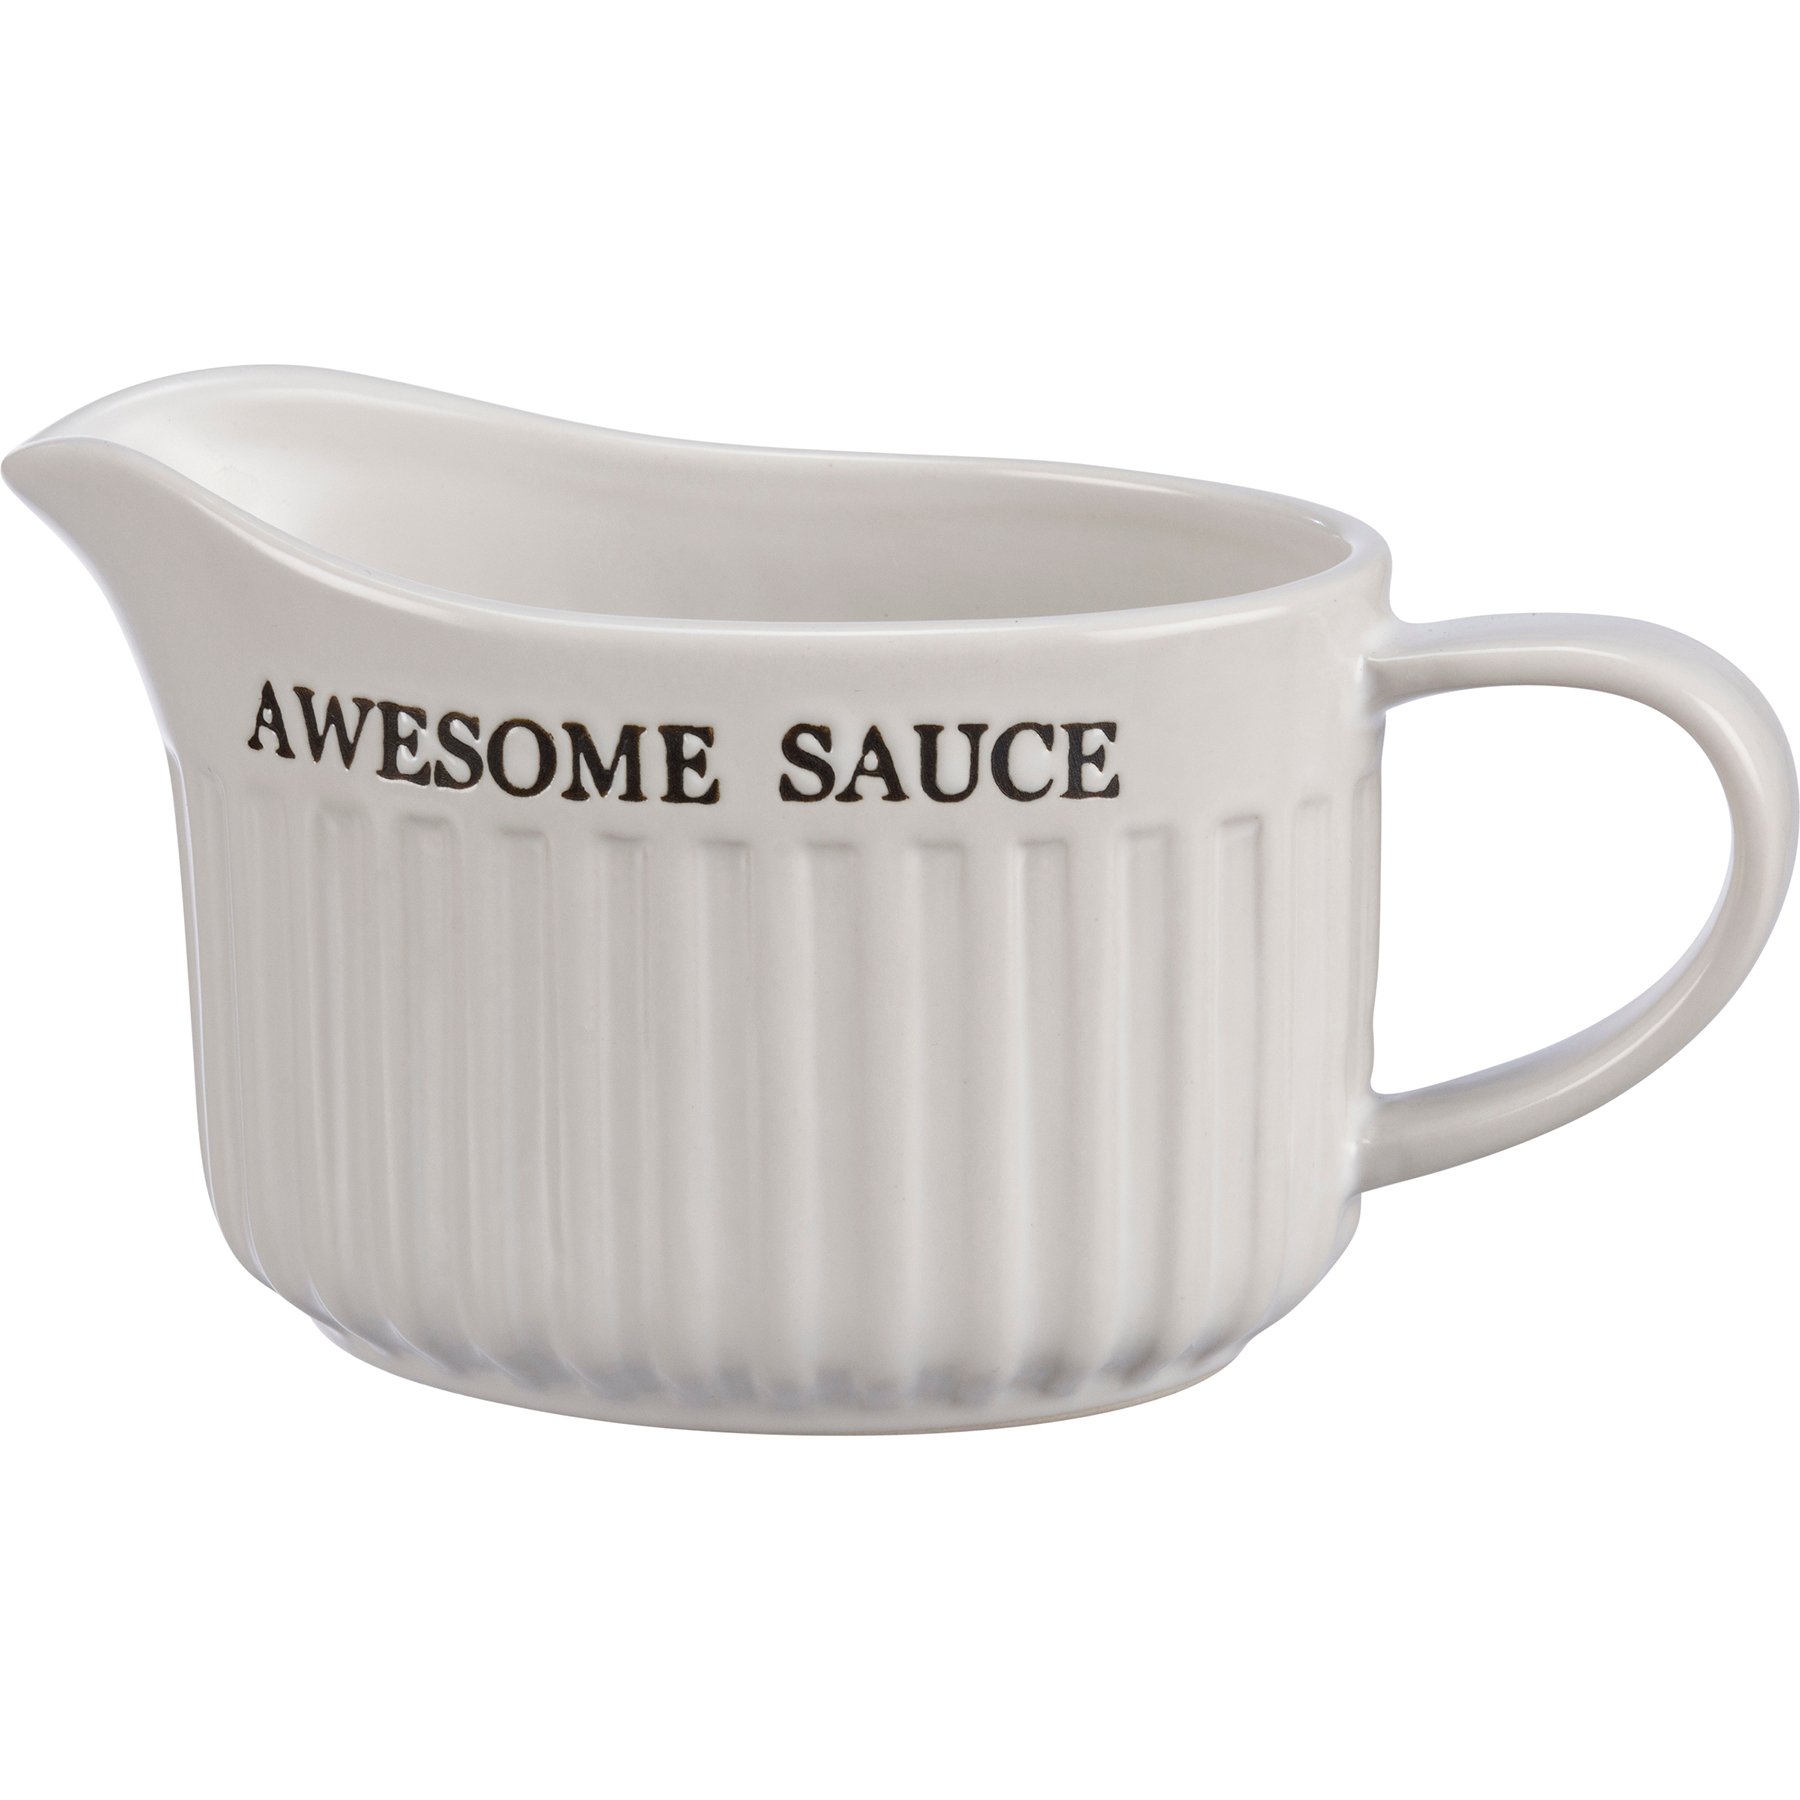 Awesome Sauce Gravy Boat